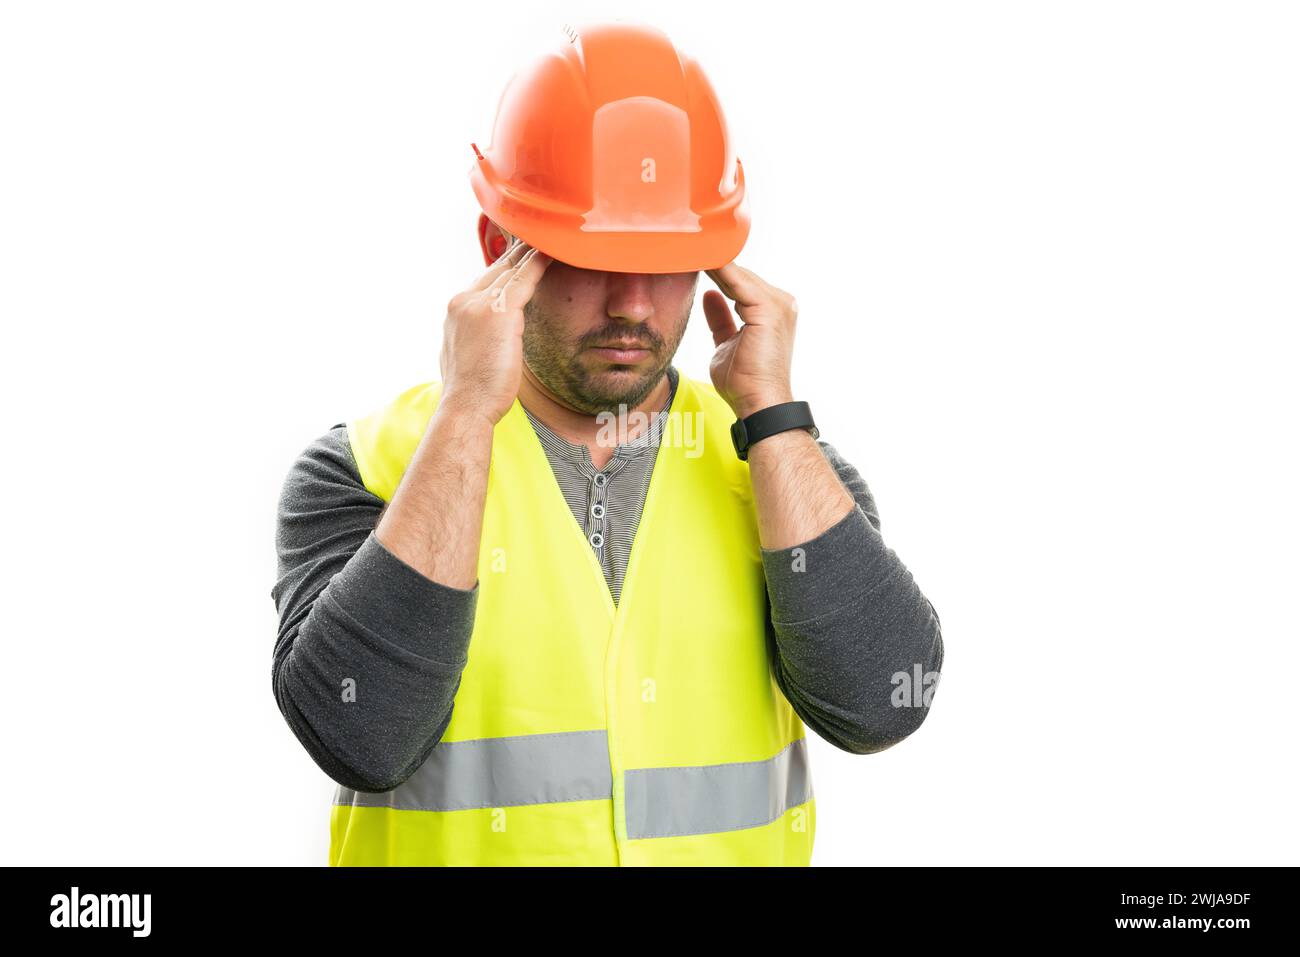 Male adult constructor touching temples as painful migraine as stressed concept wearing work attire safety orange helmet and fluorescent vest isolated Stock Photo